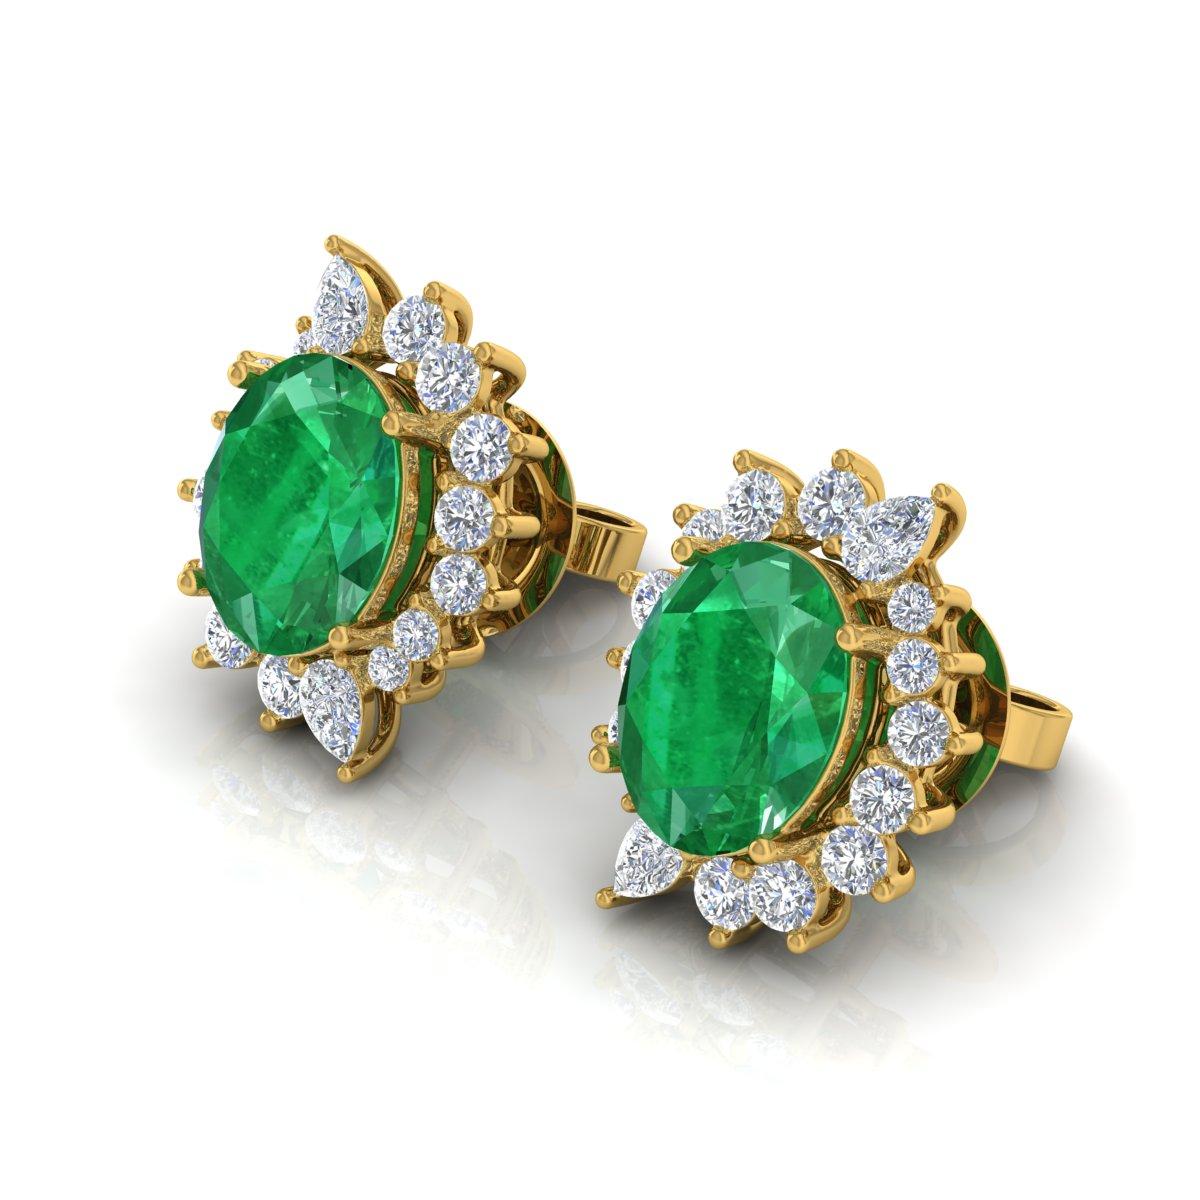 Item Code :- CN-26245
Gross Wt. :- 5.32 gm
18k Solid Yellow Gold Wt. :- 4.31 gm
Natural Diamond Wt. :- 1.25 Ct. ( AVERAGE DIAMOND CLARITY SI1-SI2 & COLOUR H-I )
Emerald Wt. :- 3.80 Ct.
Earrings Size :- 15.5 mm approx.

✦